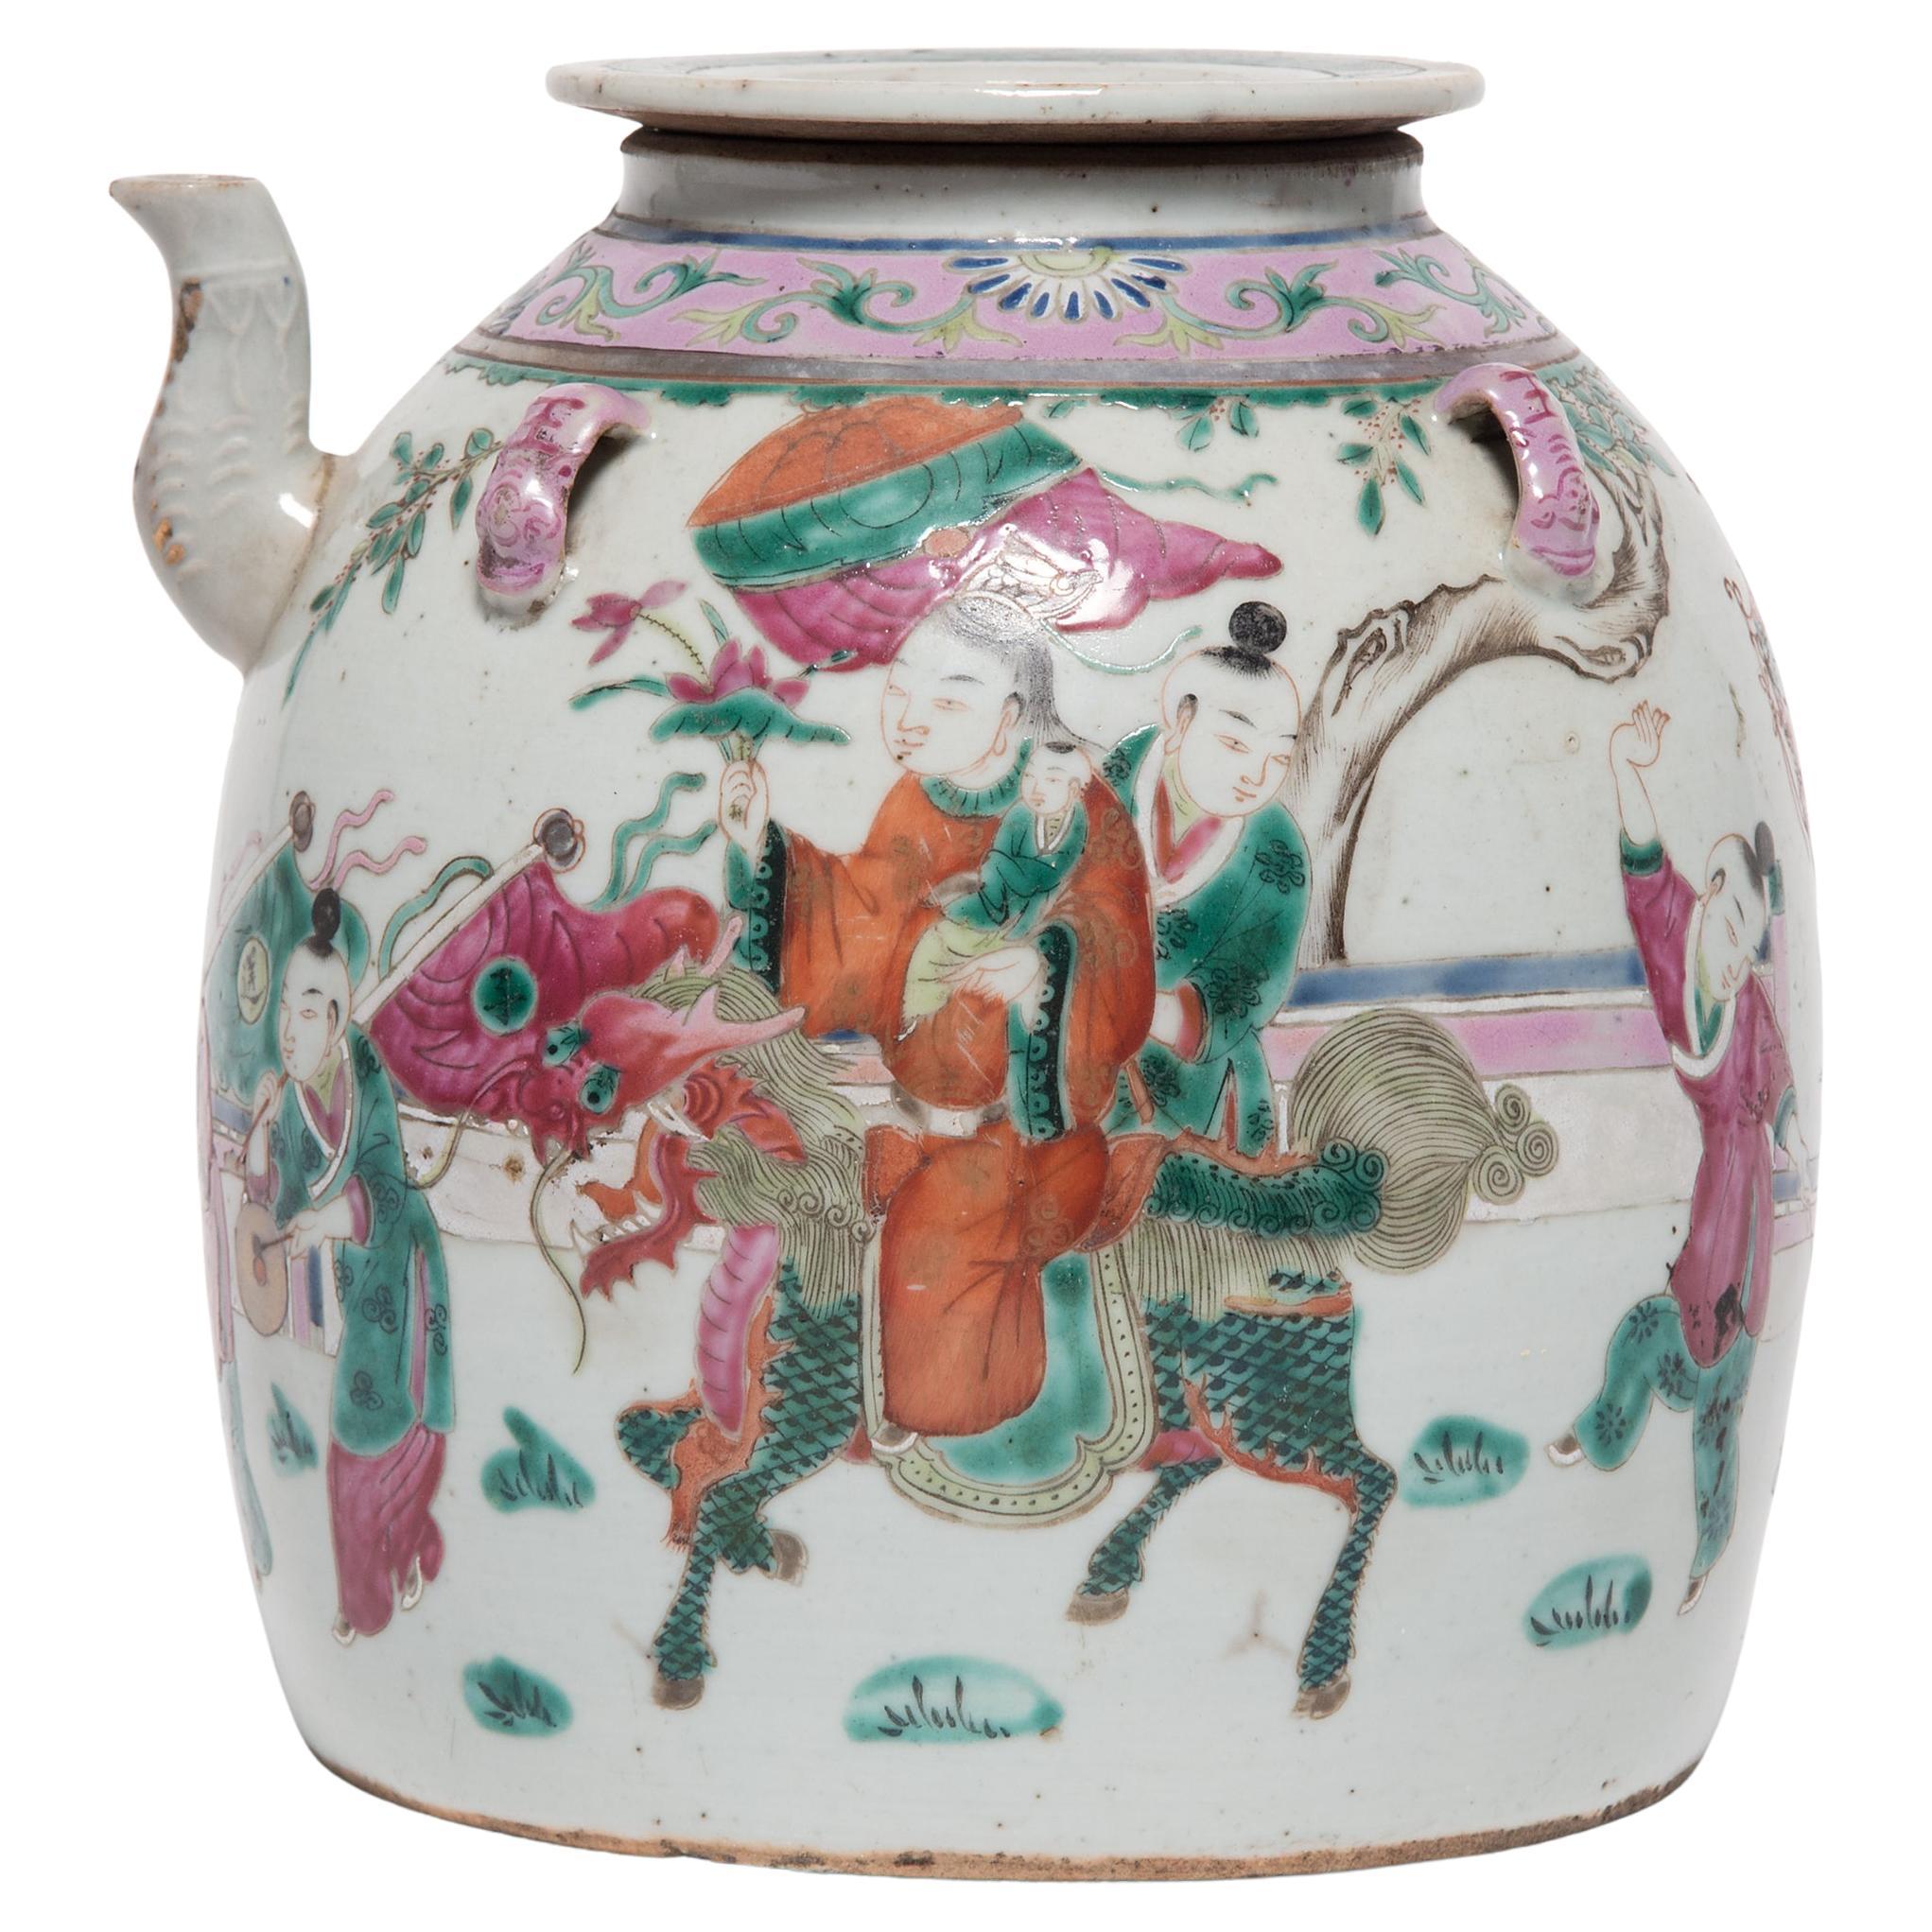 Chinese Enamelware Teapot with Goddess of Fertility, c. 1920